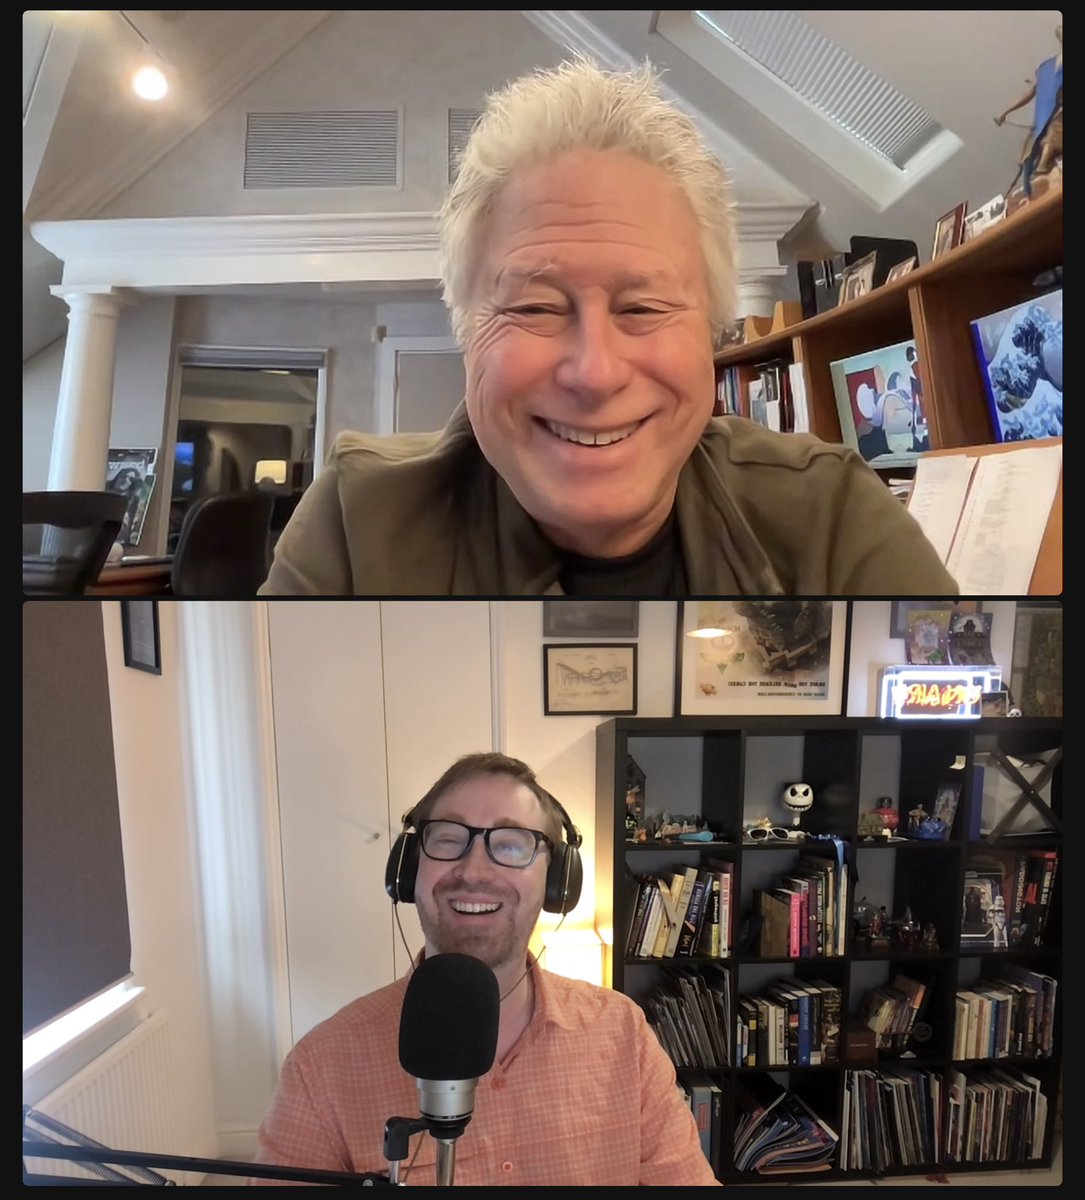 Here is @NickHutsonMusic’s interview with Alan Menken. They discuss Hercules, adapting and translating musicals and Alan’s creative process. traffic.libsyn.com/musicaltalk/mt…